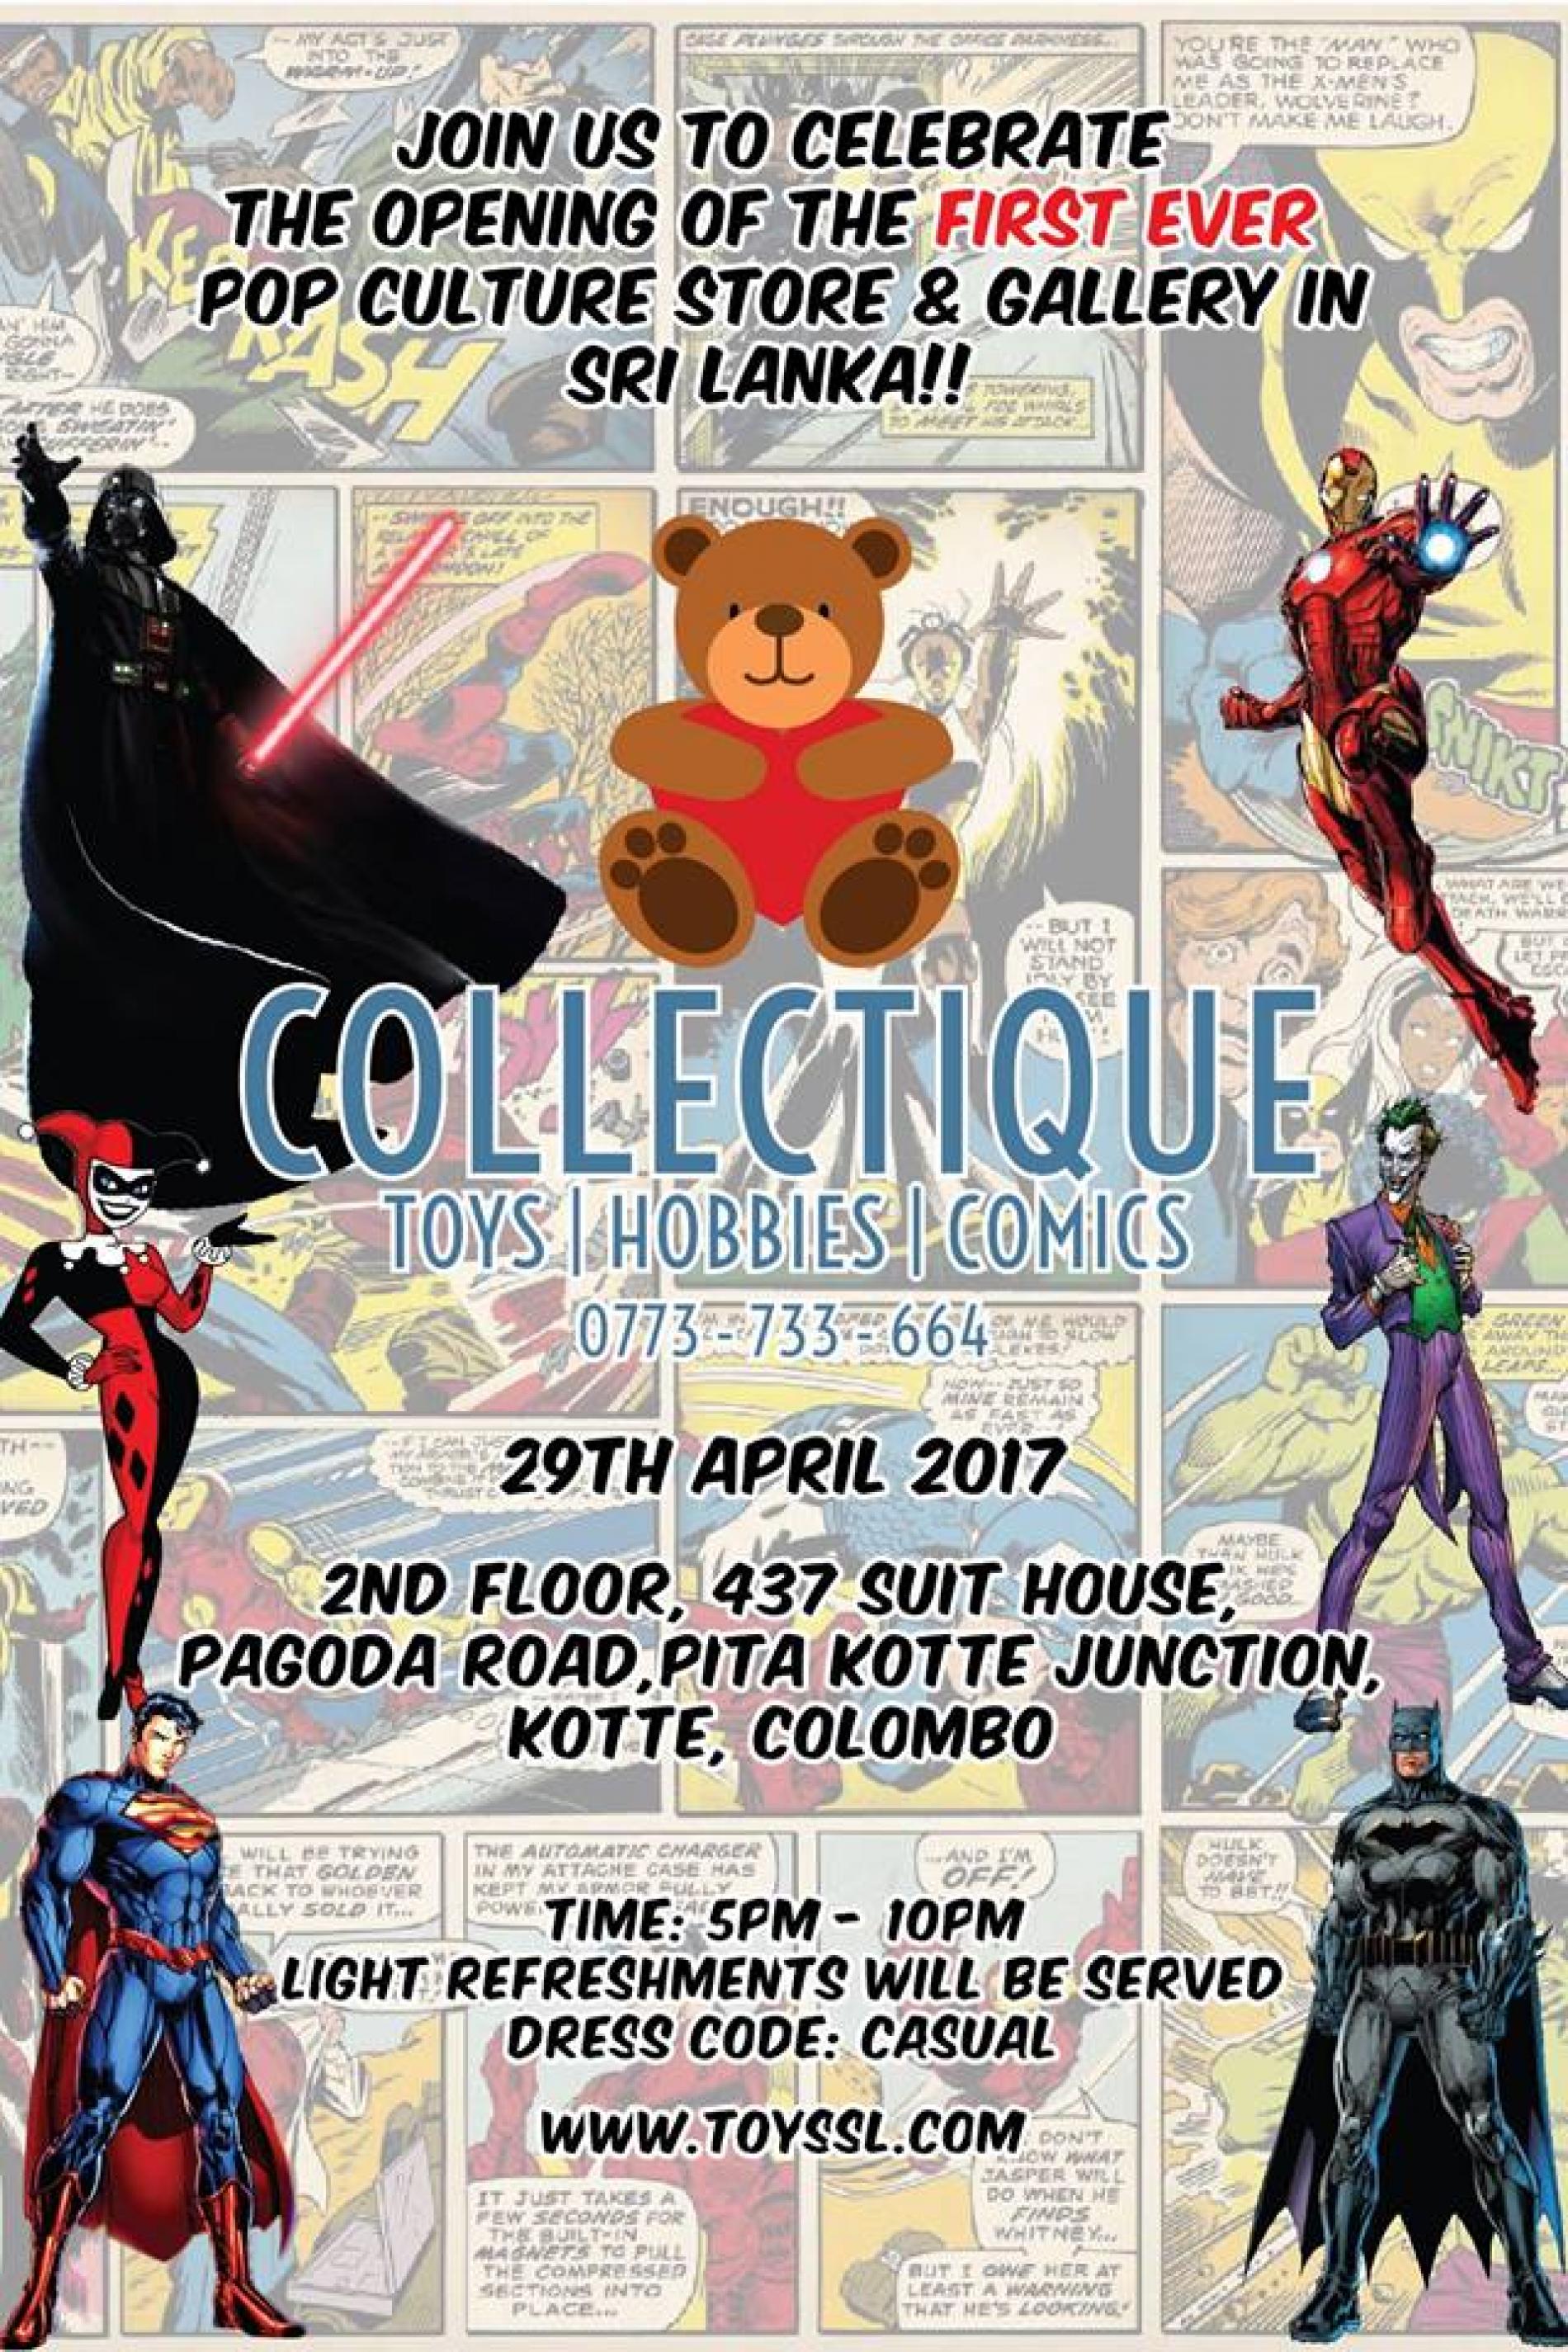 The Launch Of The First Pop Culture Store & Gallery in Sri Lanka